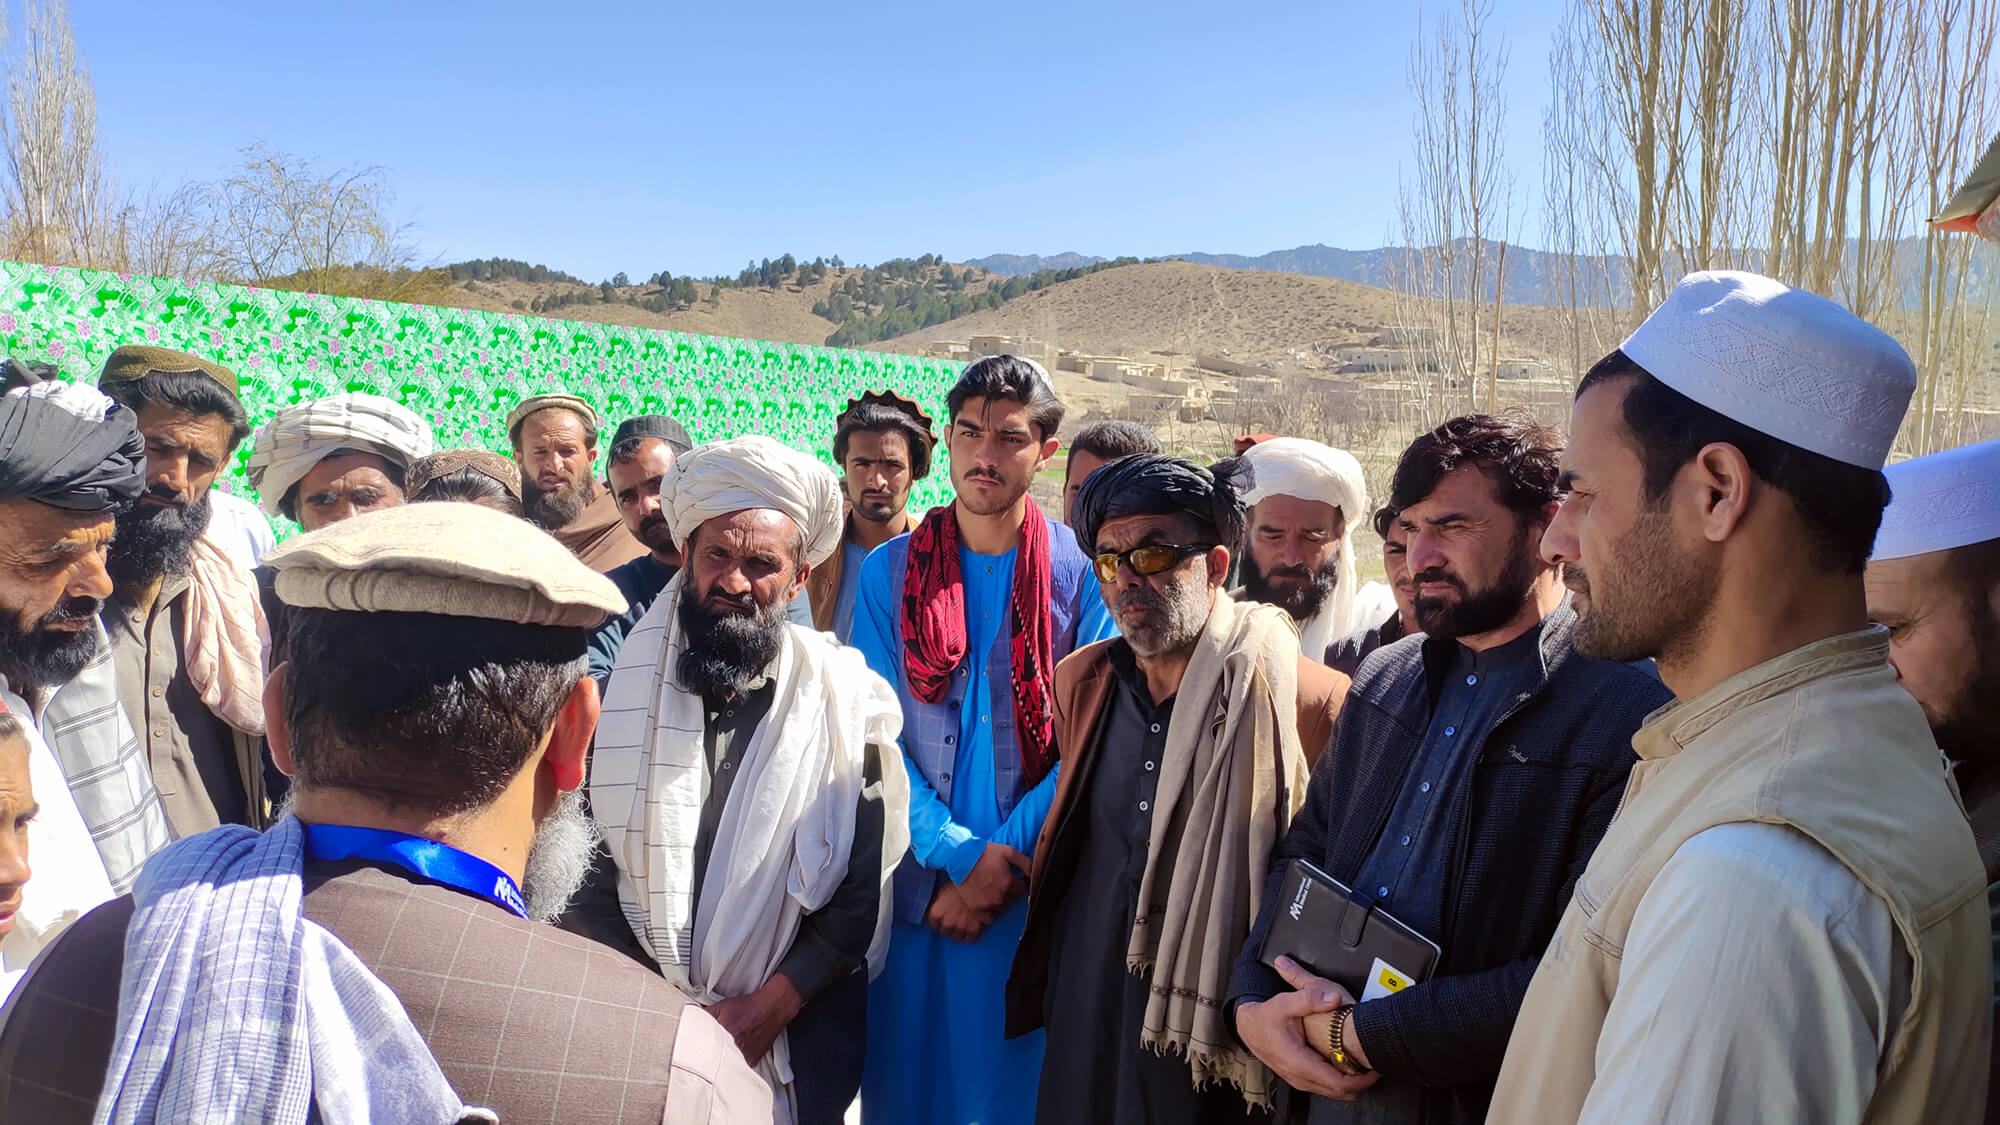 Dr. Mohammad Zahir Khan, Program Coordinator in Afghanistan, explains the situation in Paktika province and why International Medical Corps established the new health clinics.